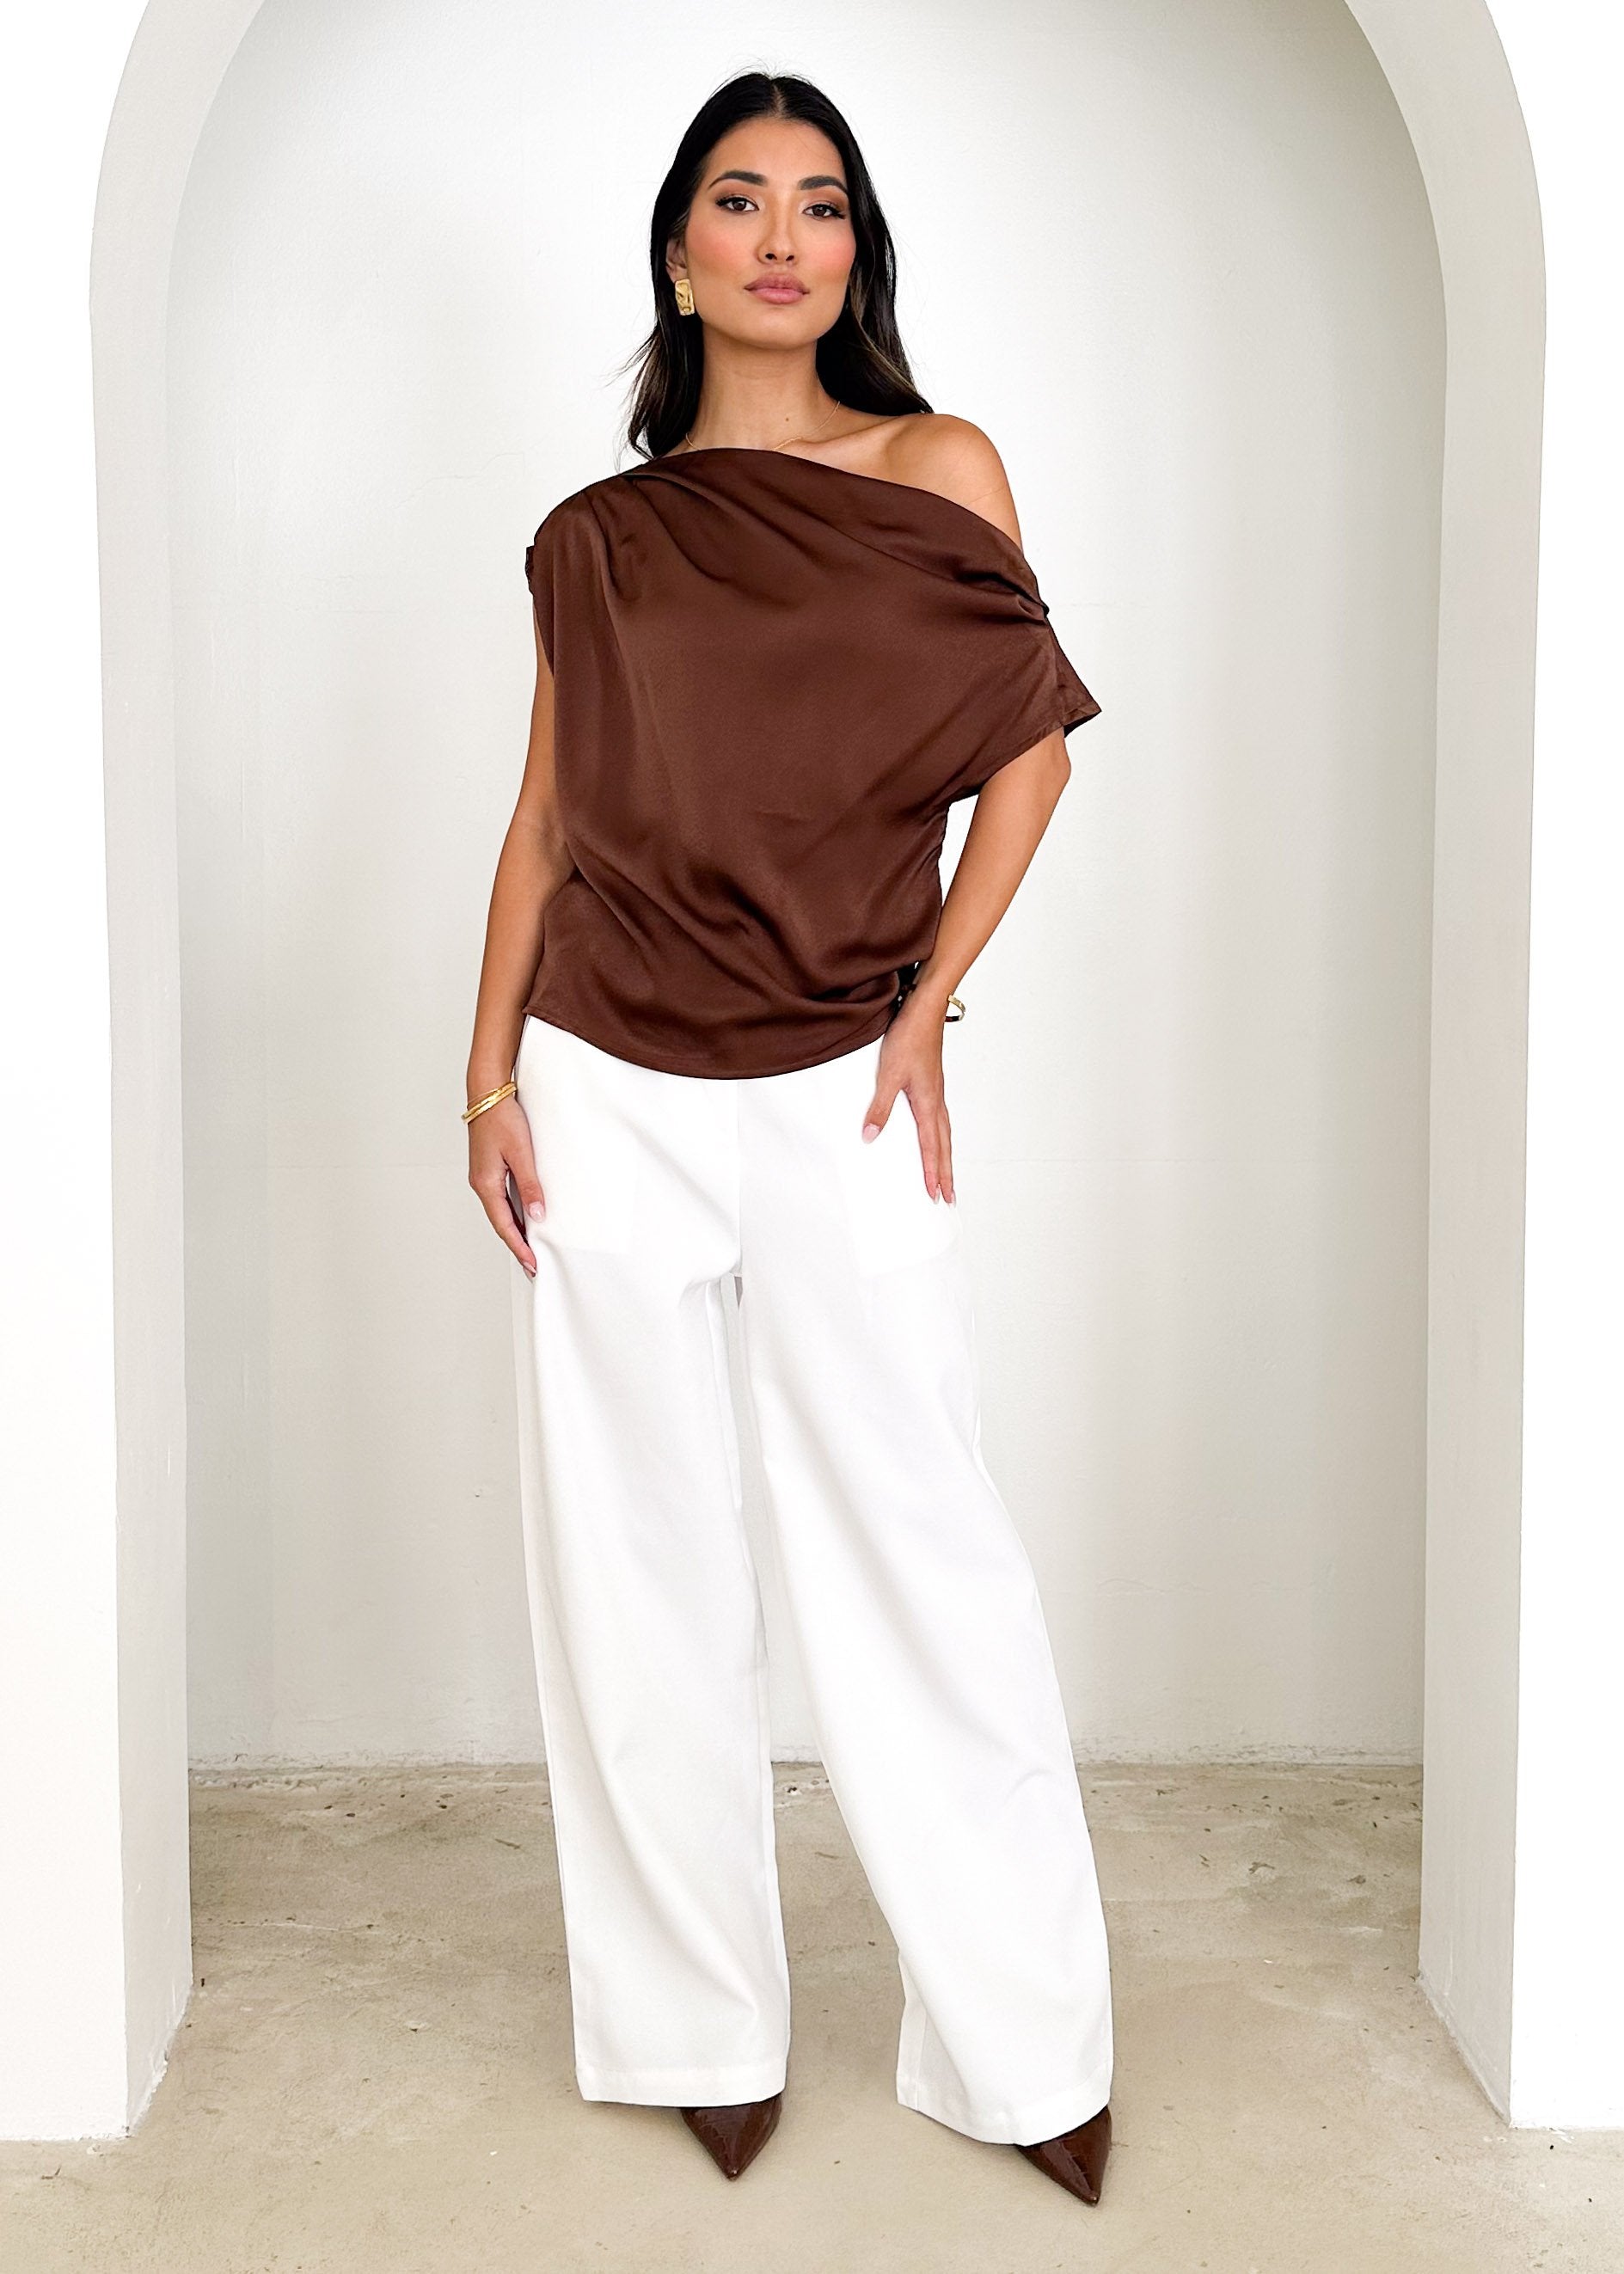 Isstra One Shoulder Top - Chocolate